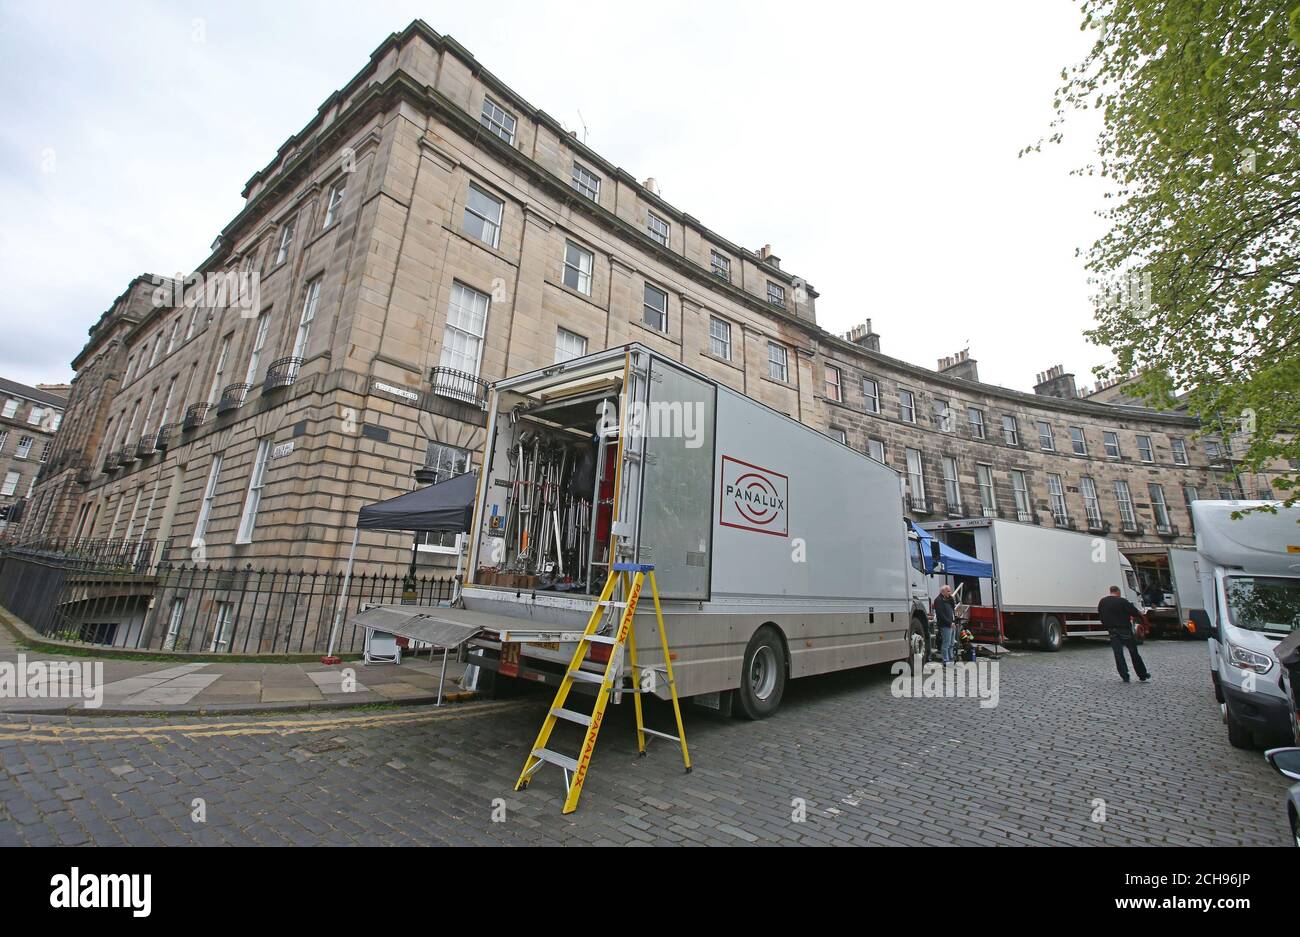 Vans on set in Royal Circus for the film Trainspotting which is currently being filmed in Stock Photo -